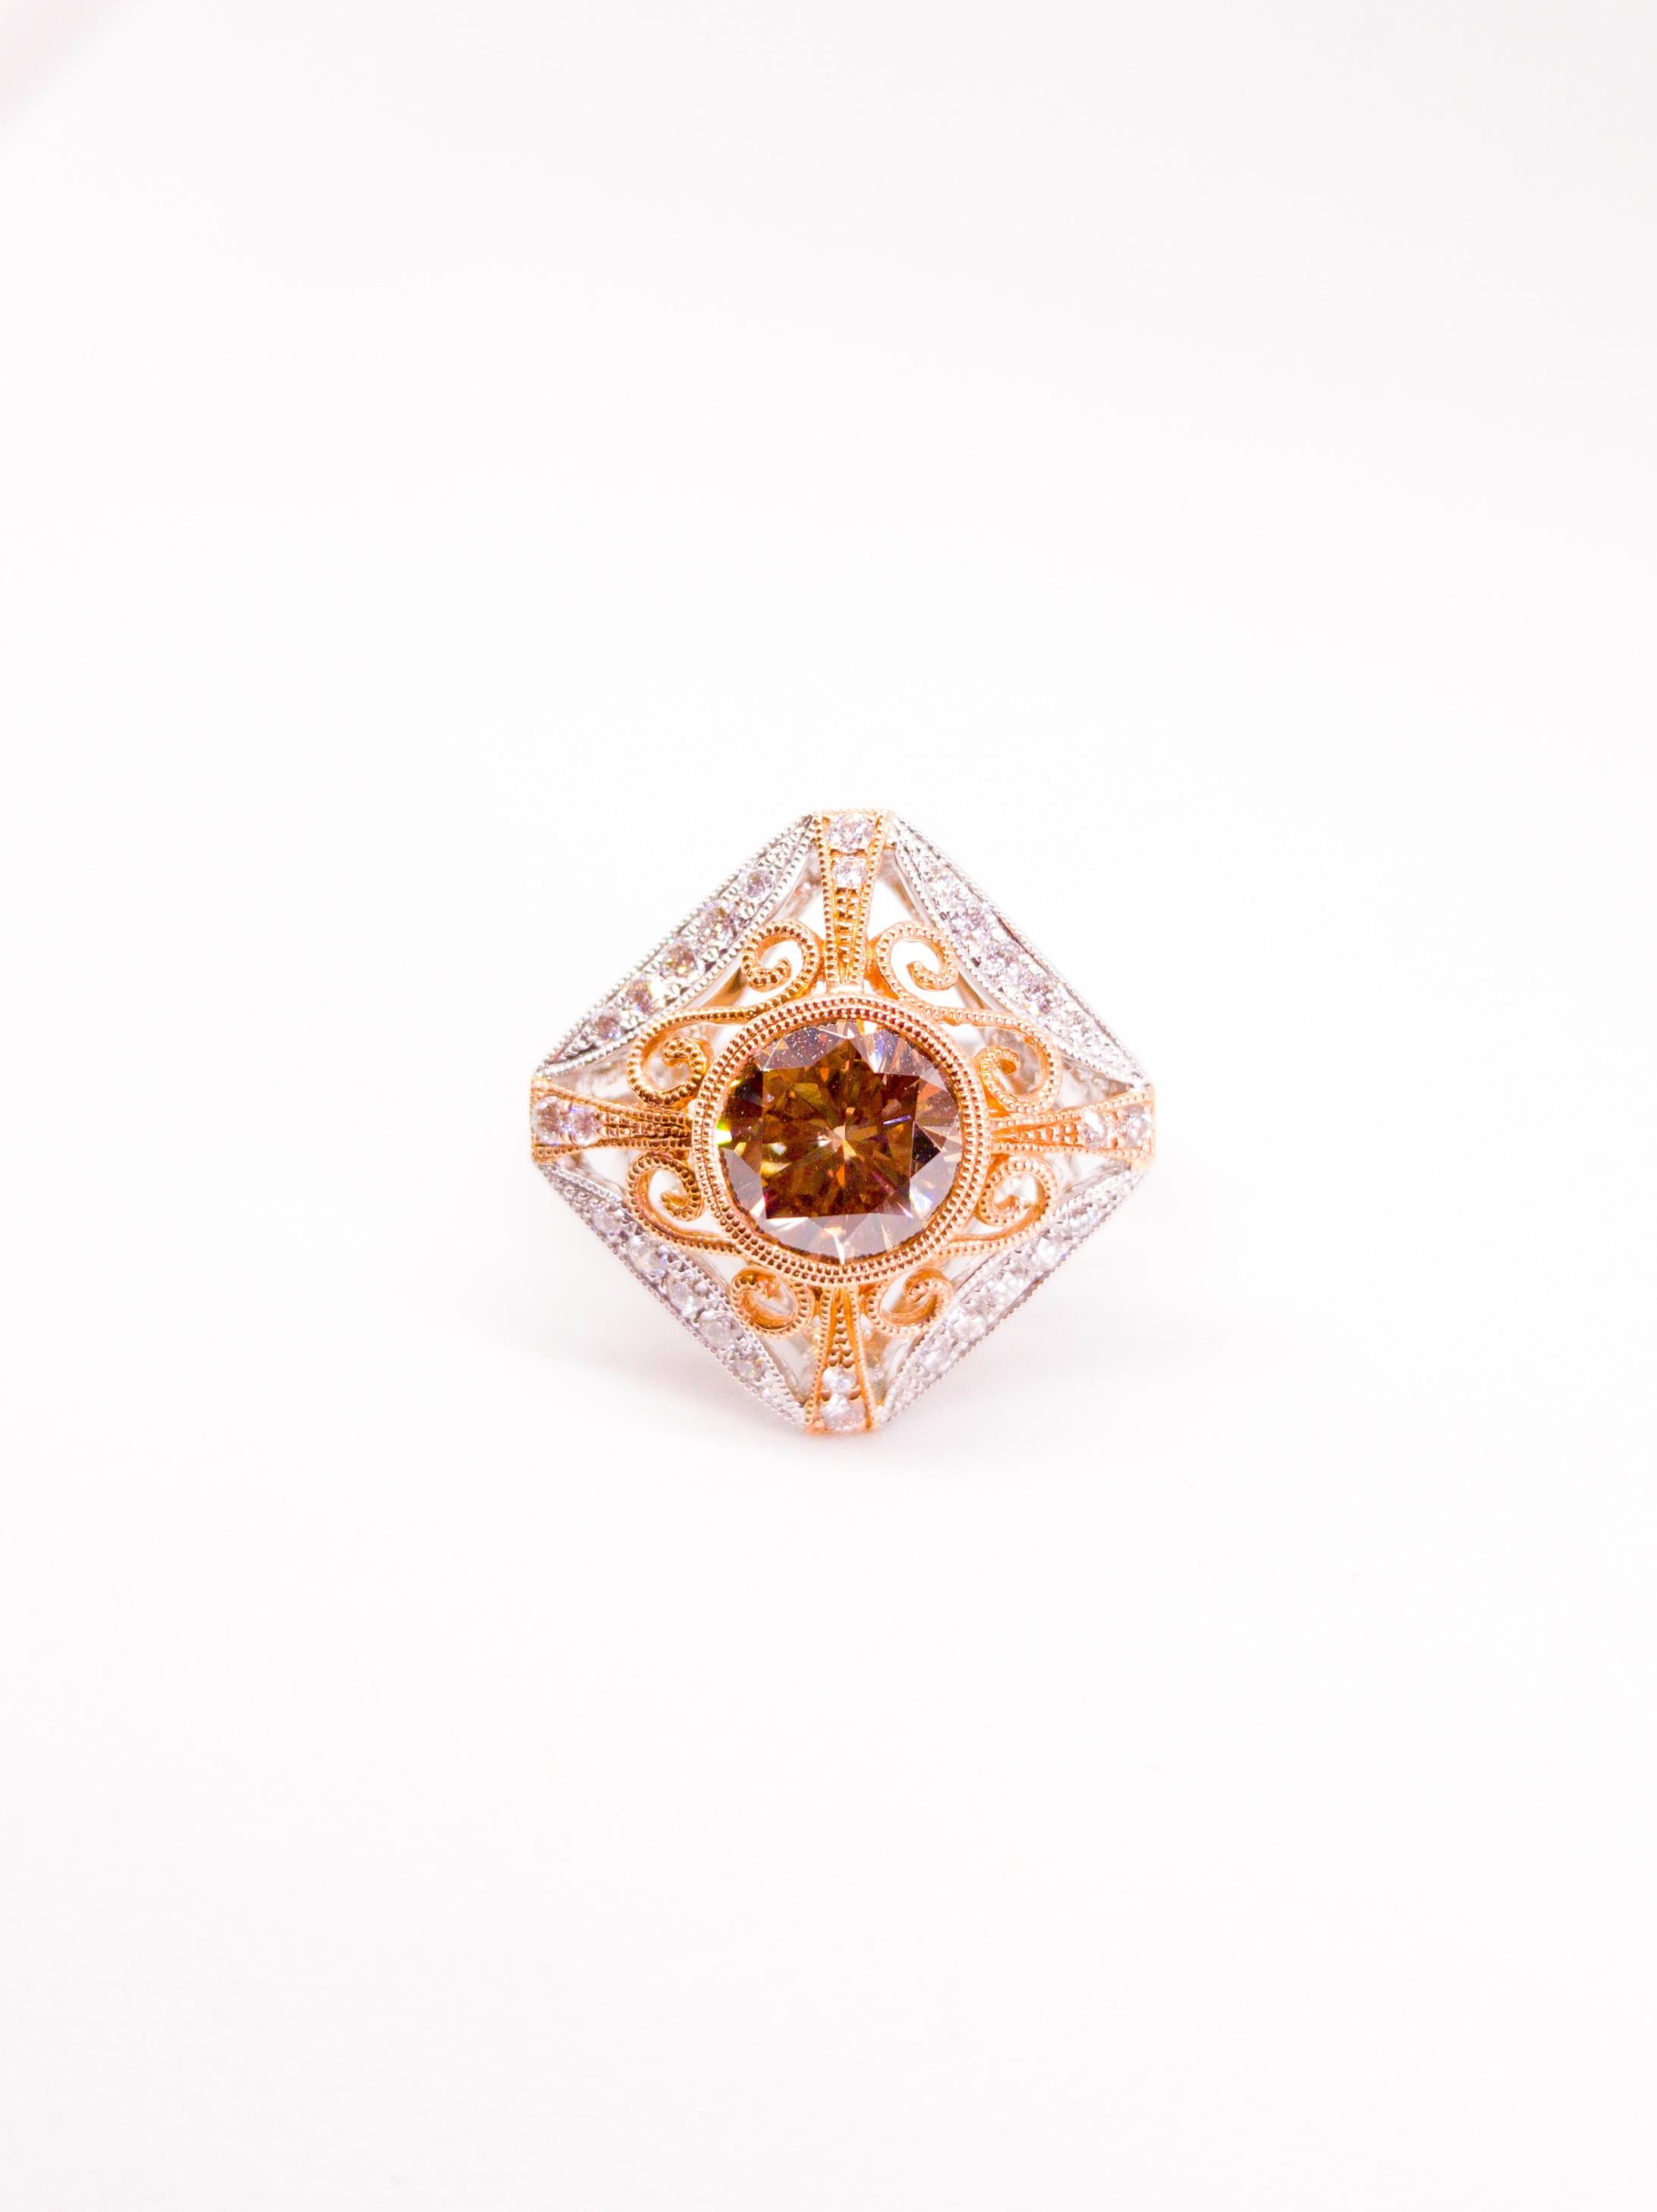 Natural Fancy Cognac / Champagne, and White Diamond Filigree Ring in 14 Karat White and Rose Gold. The Ring features a bezel set Round Brilliant Diamond of Natural Fancy Color and Vs2 - Si1 Clarity and a weight of 1.80 Carats. The Ring is also set